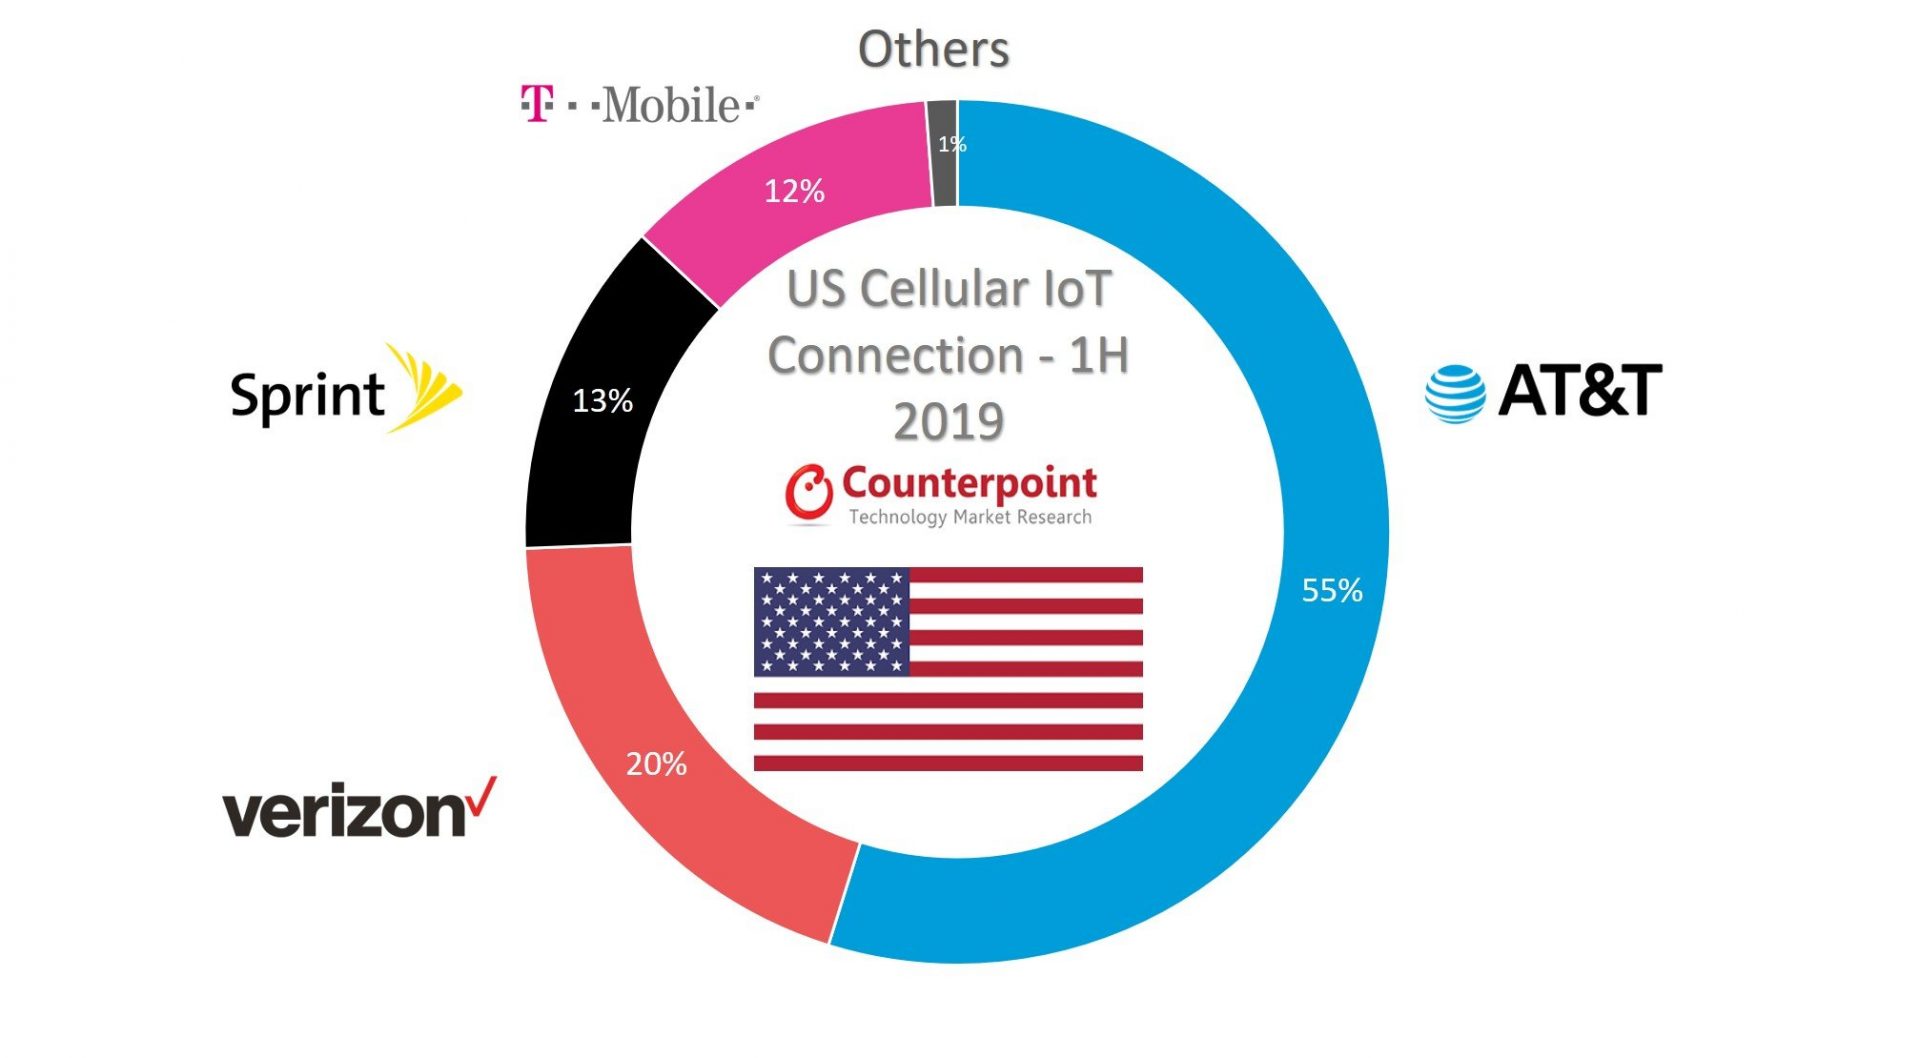 US Cellular IoT Connection by Operator